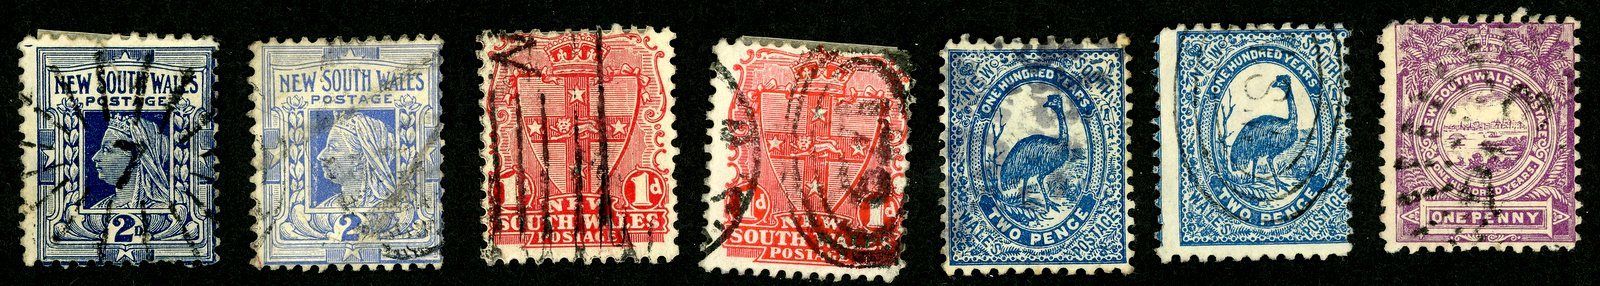 NEW SOUTH WALES 1888-1897 USED SCOTT 77-79 81B-82 89 98-99 121 STAMPS